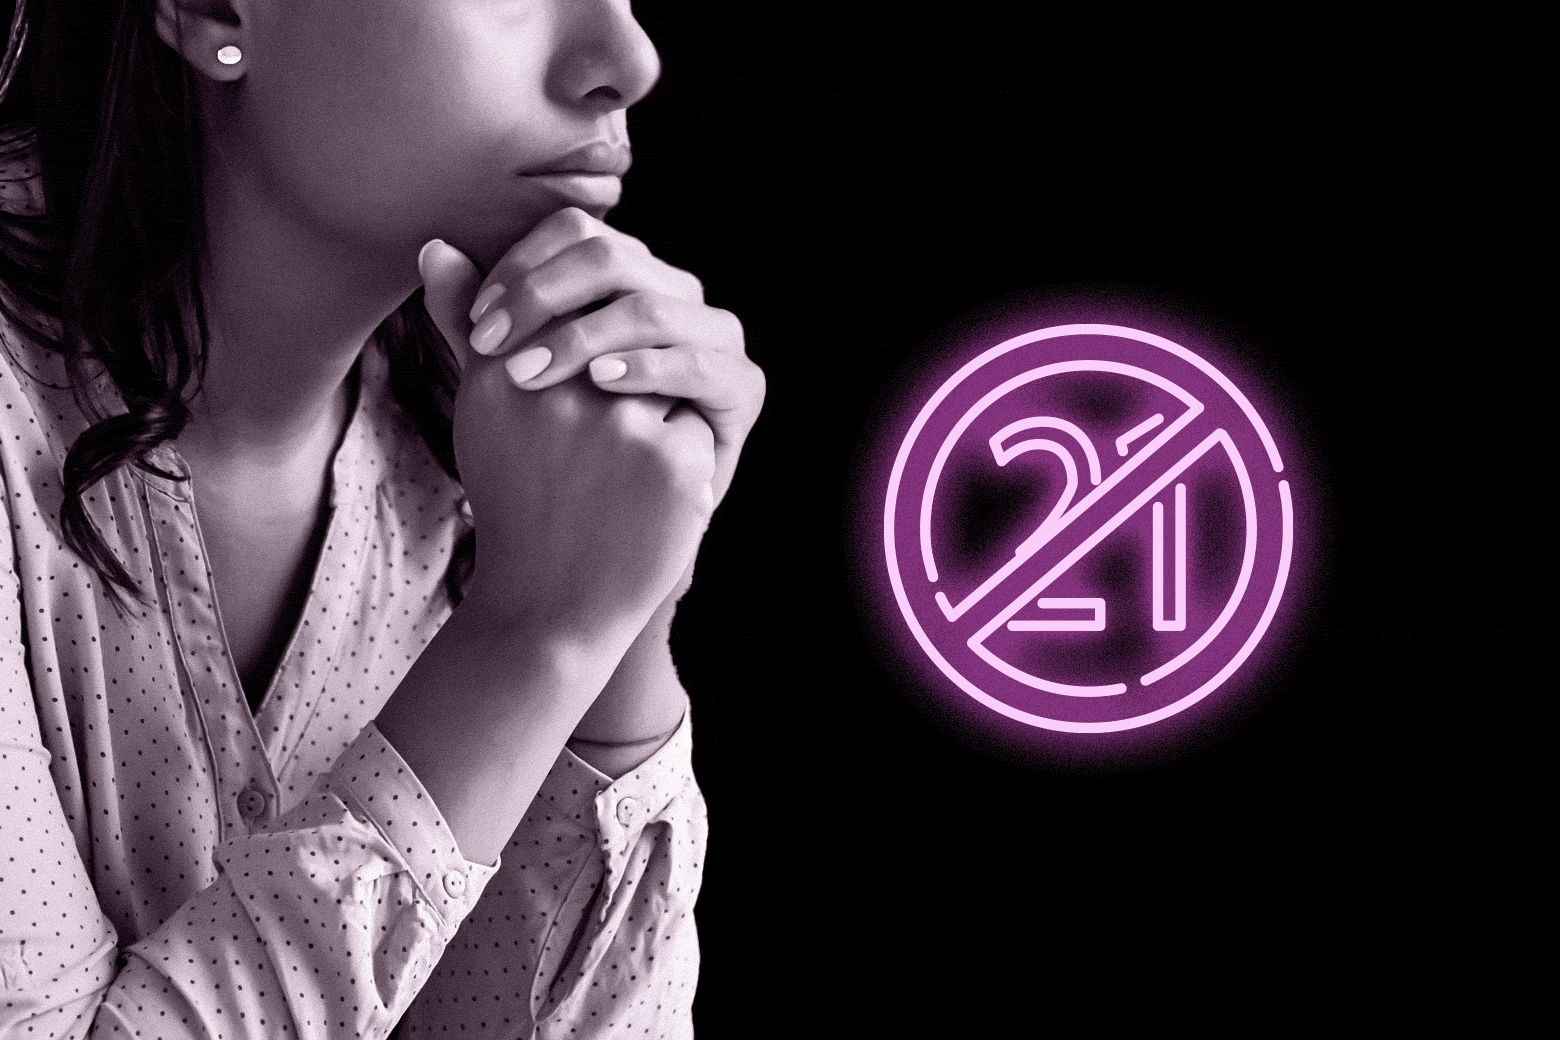 A woman looks pensive next to a neon 21 sign crossed out.